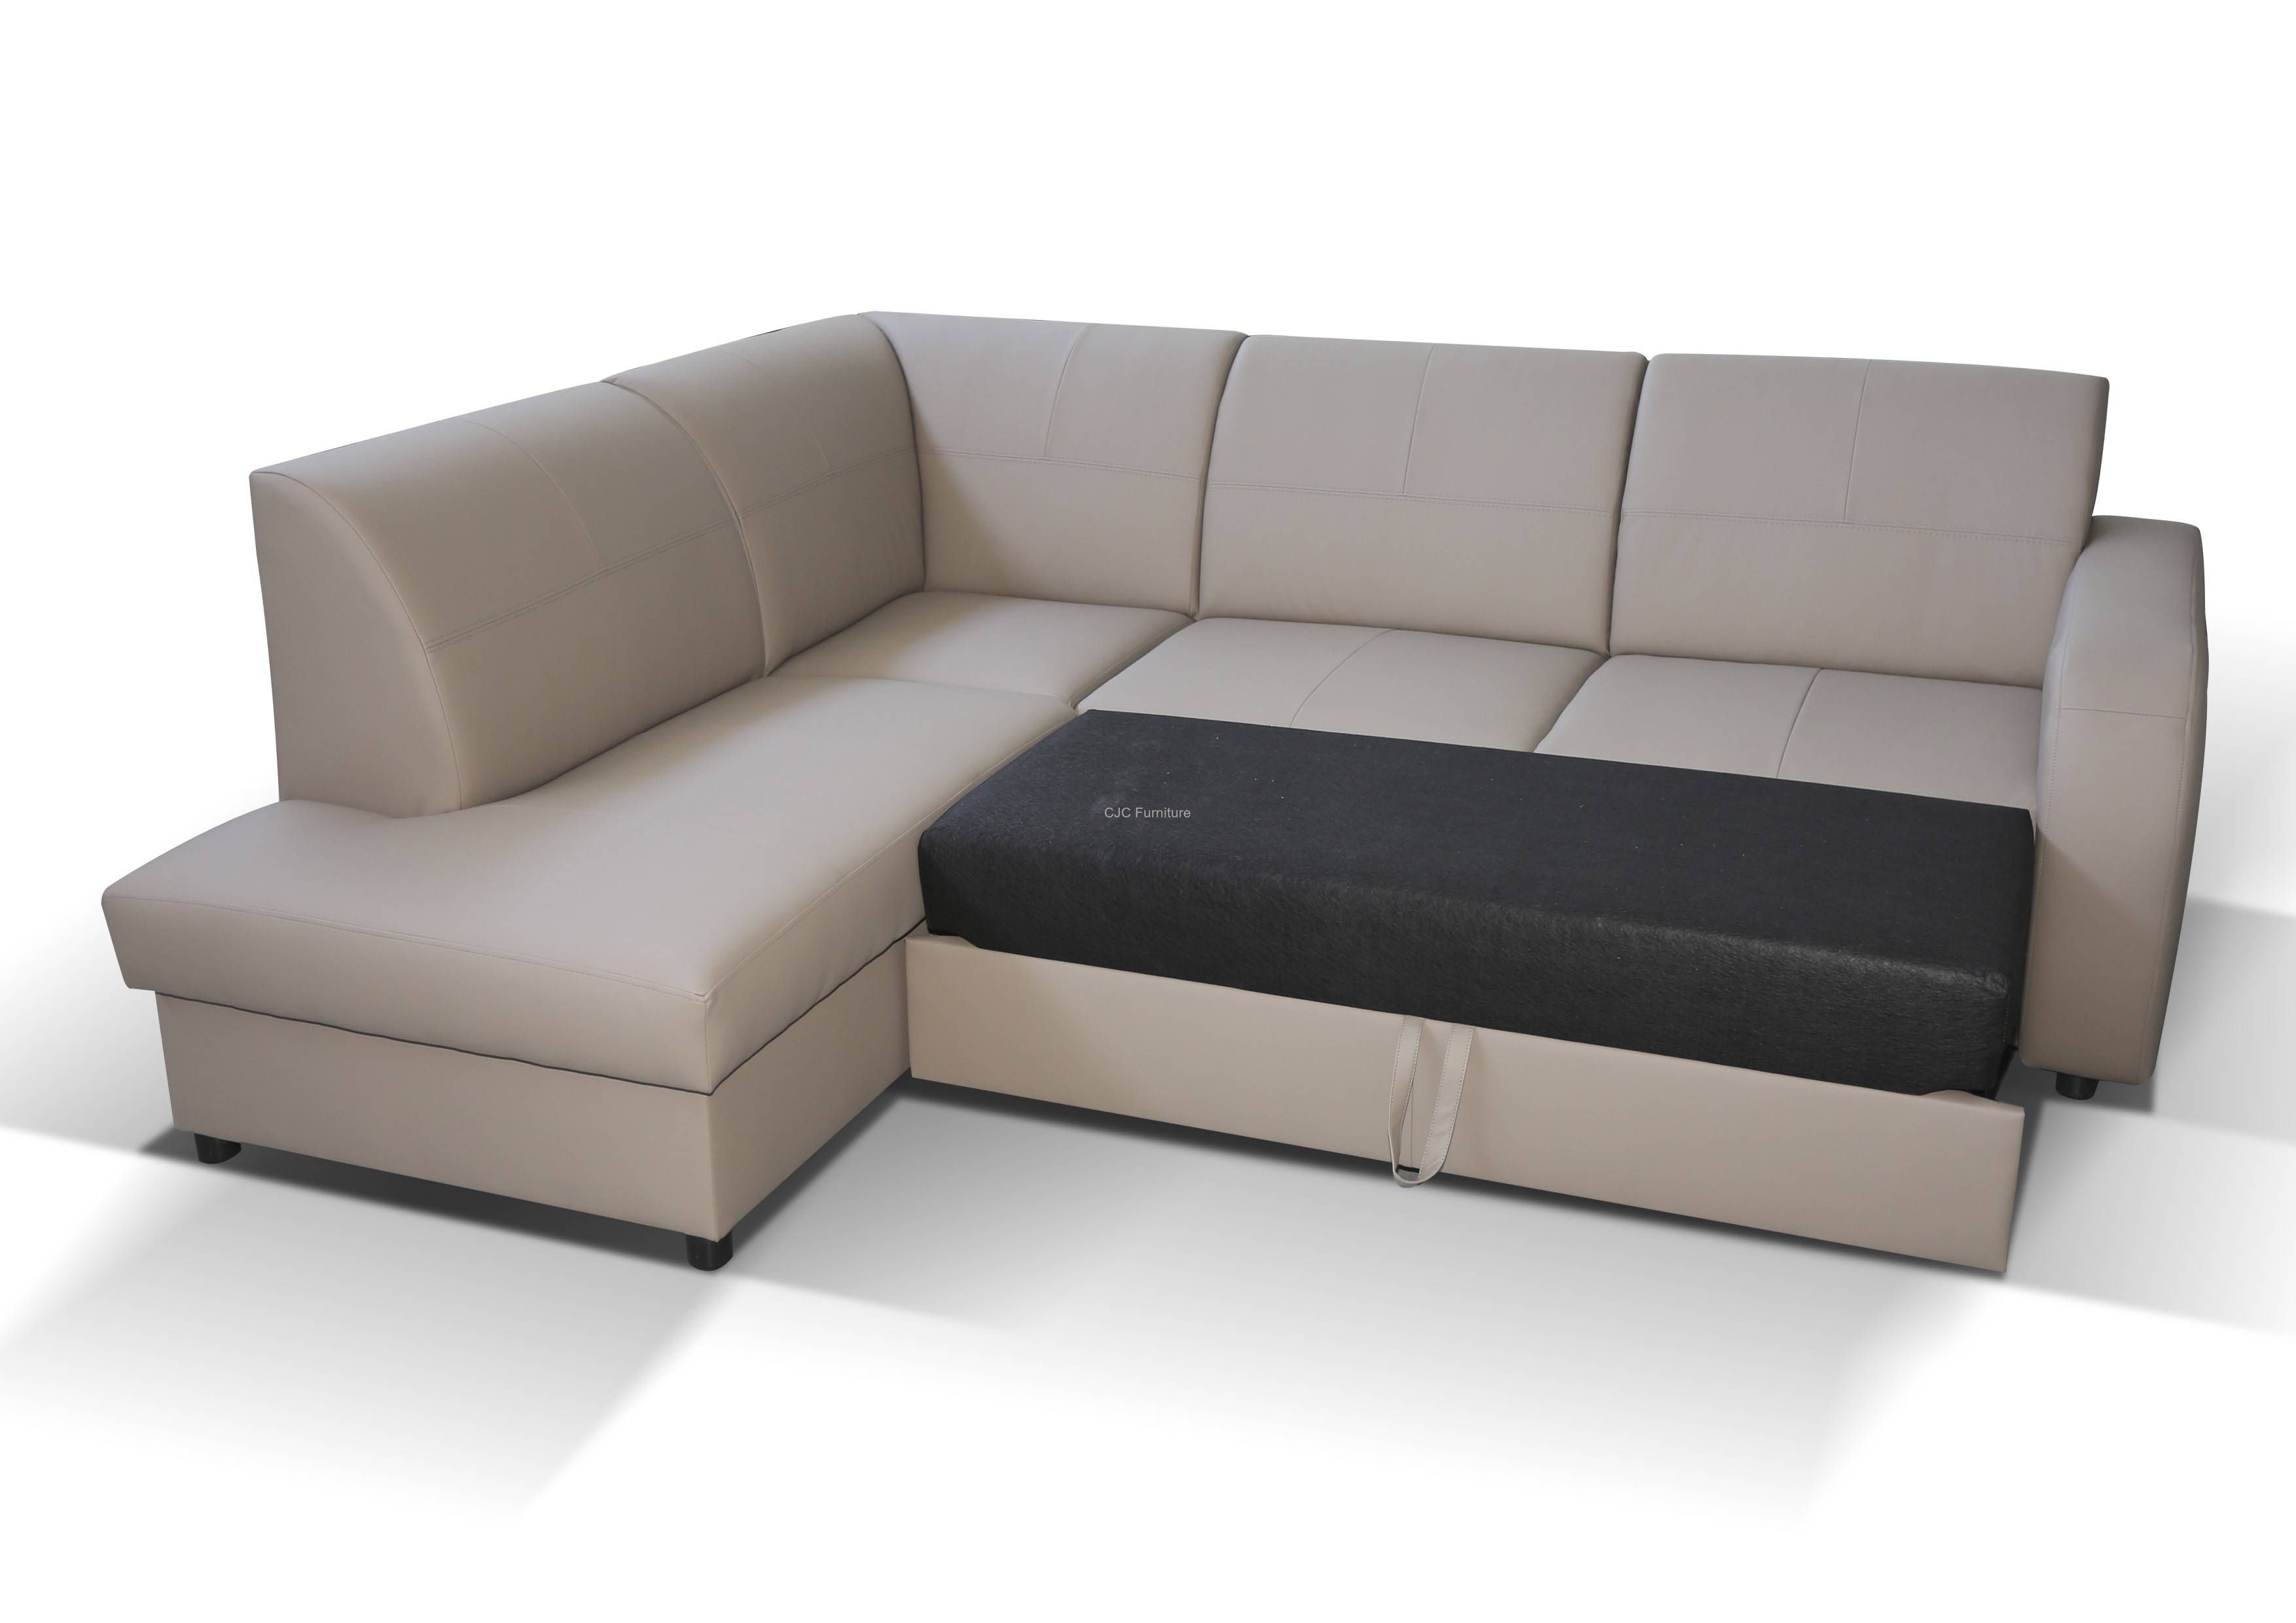 Sofas Center : Buy The Softline Cord Sofa At Nest Co Uk Vision Pertaining To Corner Sofa Bed Sale (Photo 9 of 30)